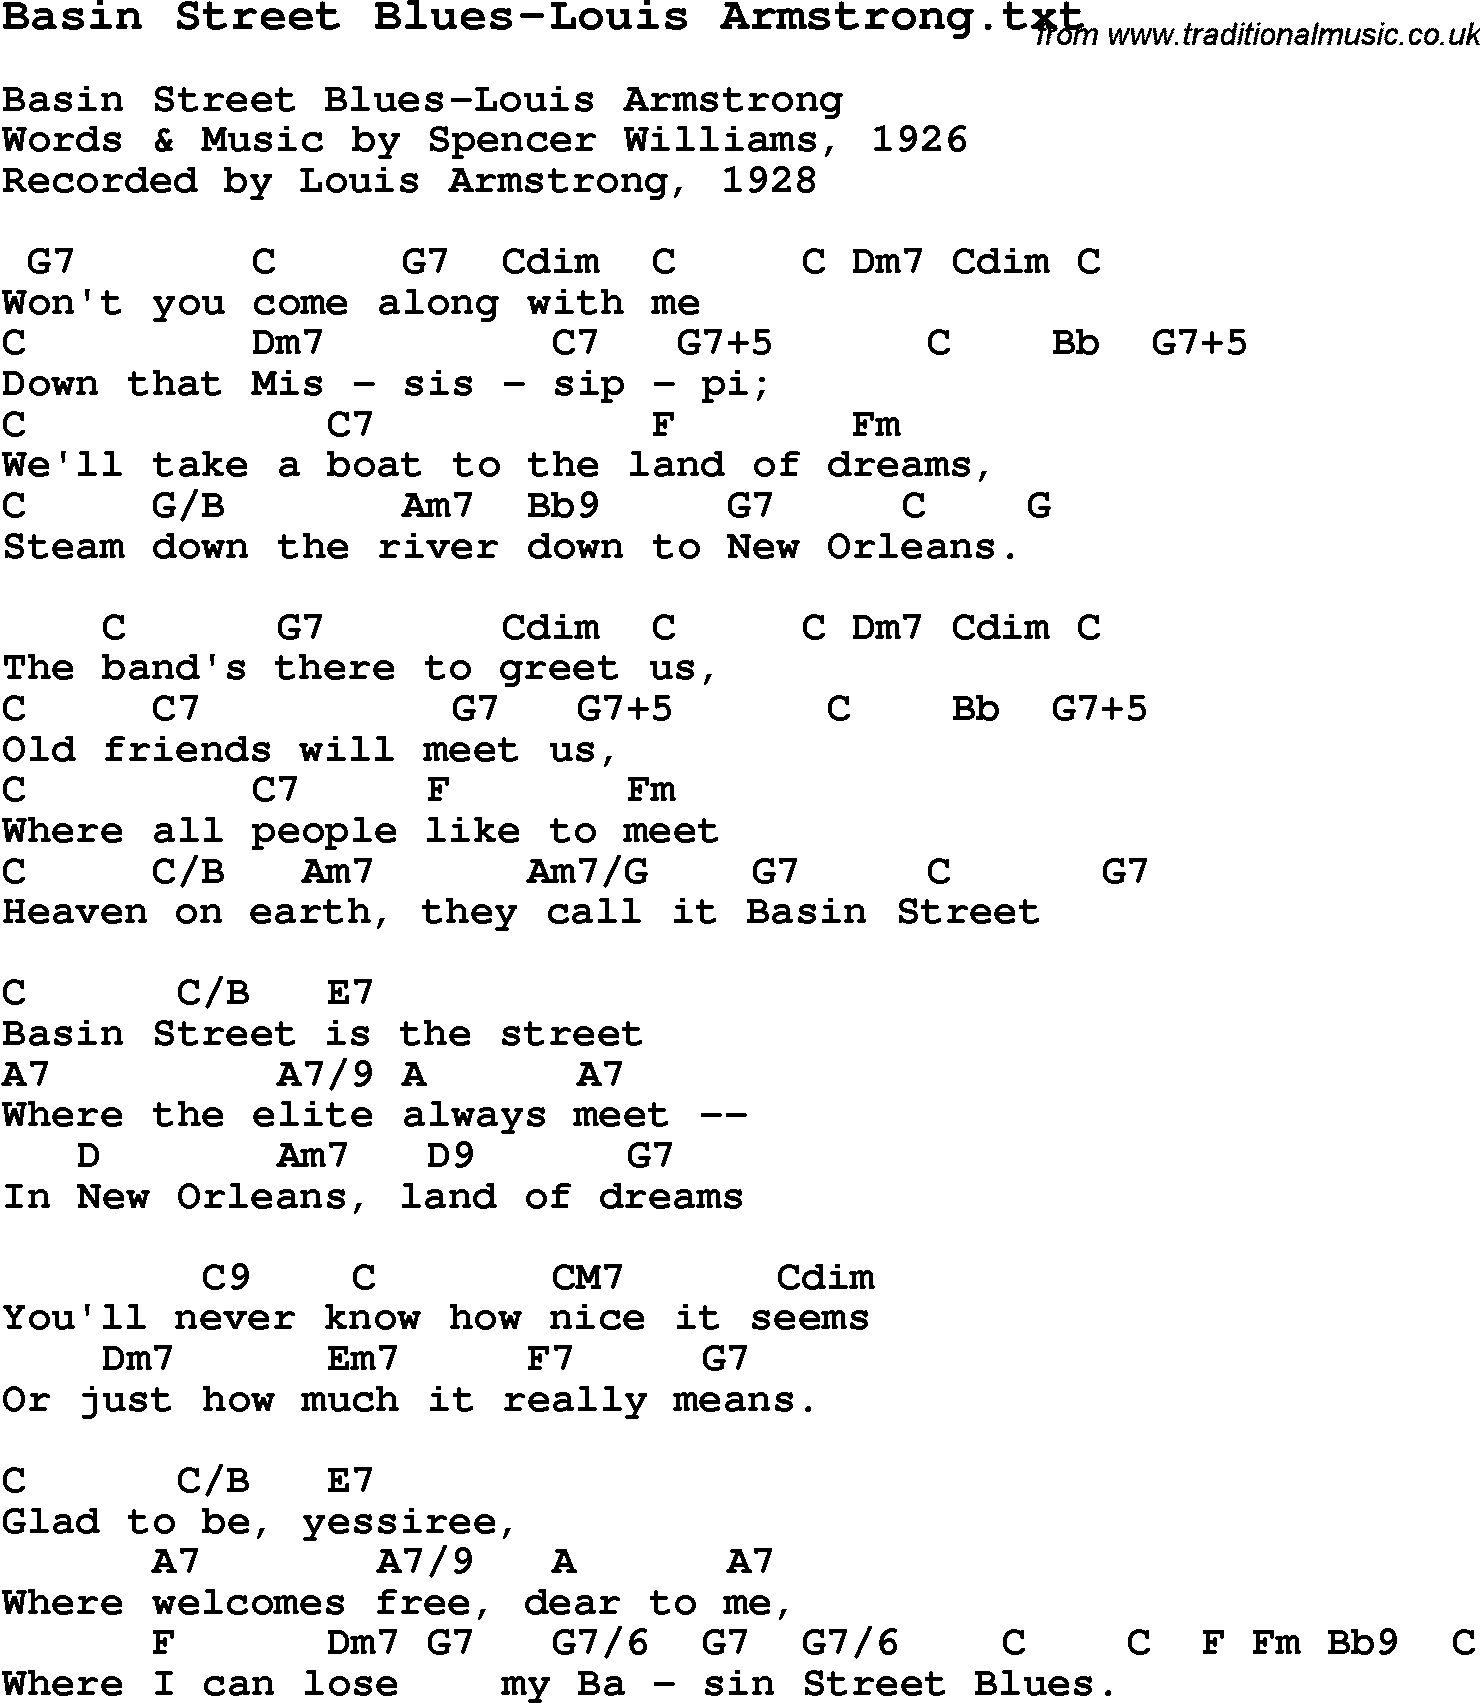 Jazz Song from top bands and vocal artists with chords, tabs and lyrics - Basin Street Blues-Louis Armstrong